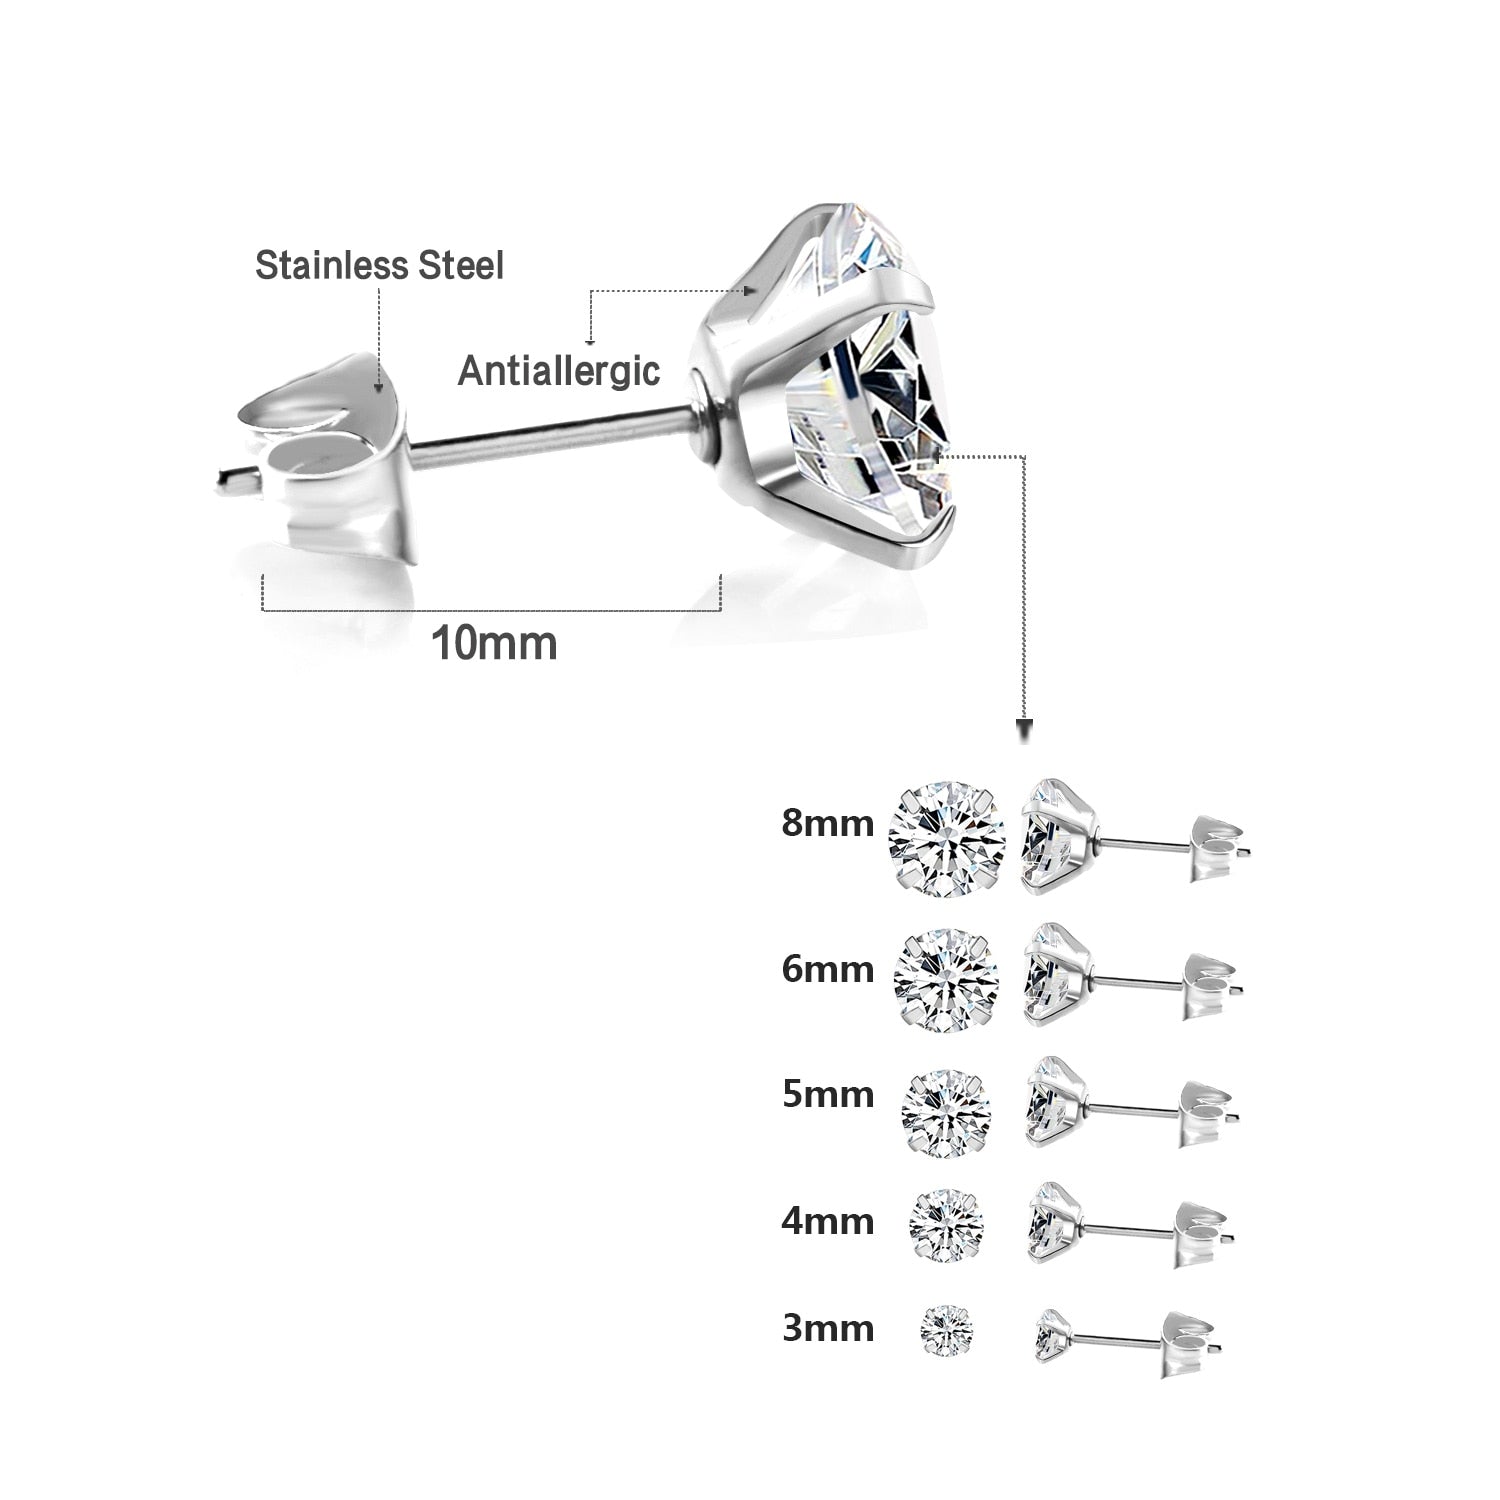 SHINE CUBIC ZIRCONIA - Crafted from exquisite AAA+ cubic zirconia. Available in sizes 3mm, 4mm, 5mm, 6mm, and 8mm, suitable for sensitive earlobe piercings and cartilage.